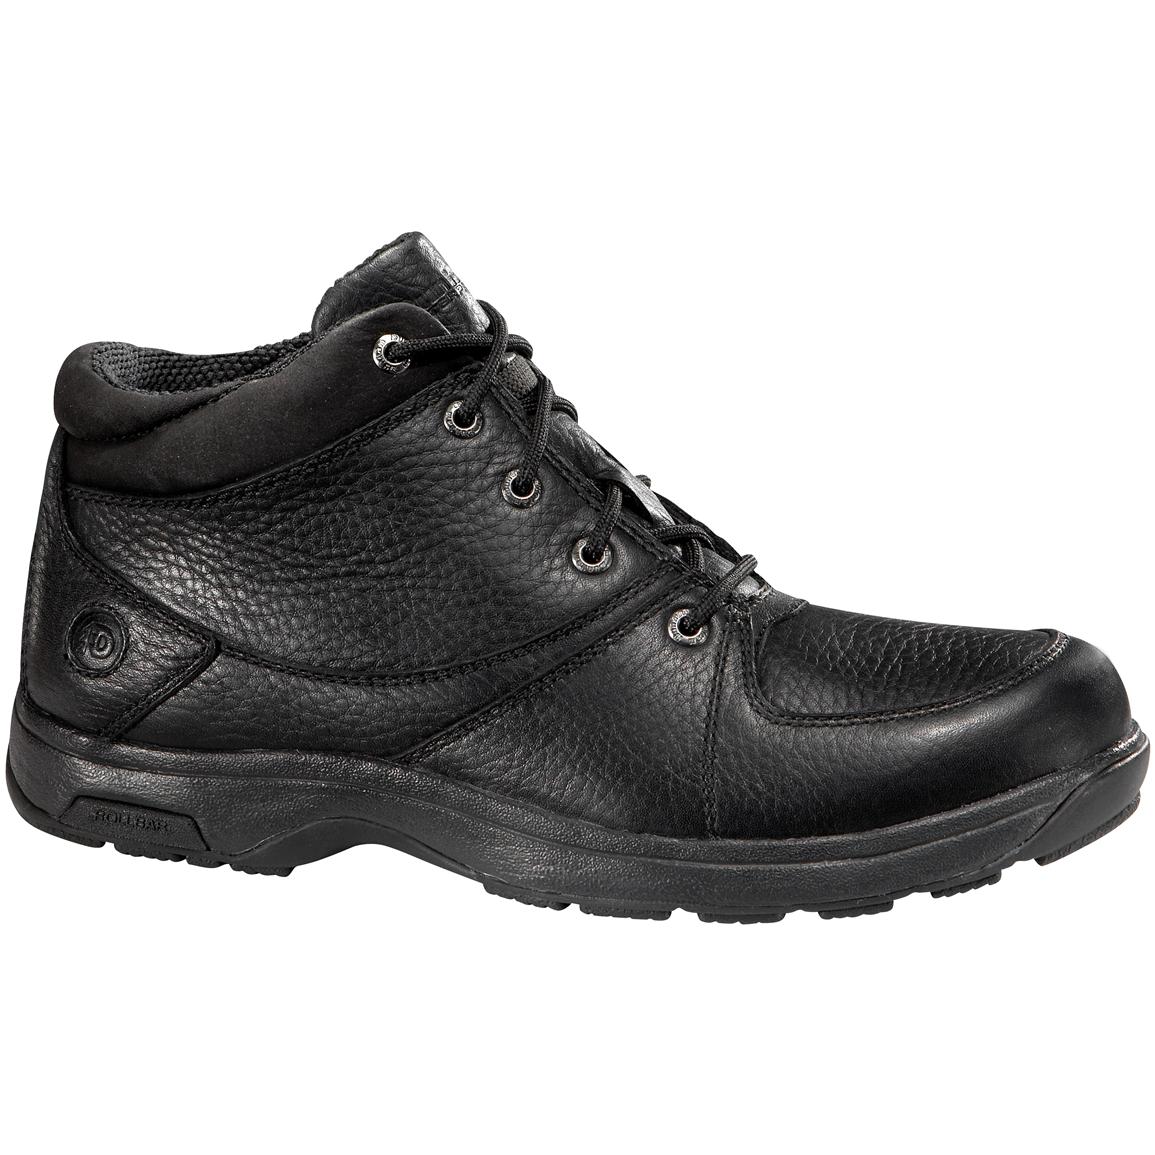 Mens Waterproof Boots On Sale | Coltford Boots